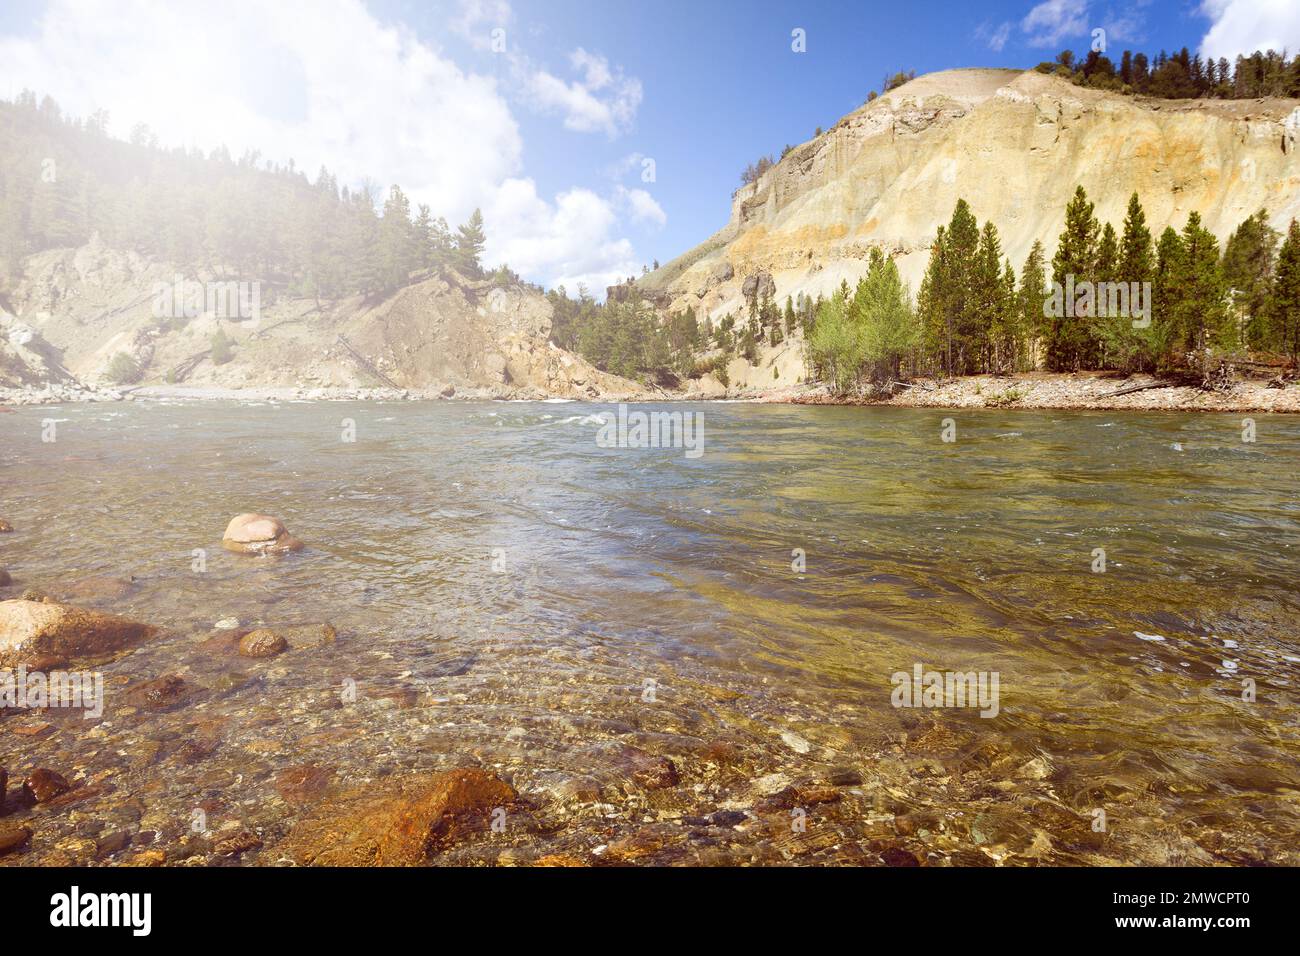 Yellowstone River running through the canyon during bright summer day. View at water level. Stock Photo